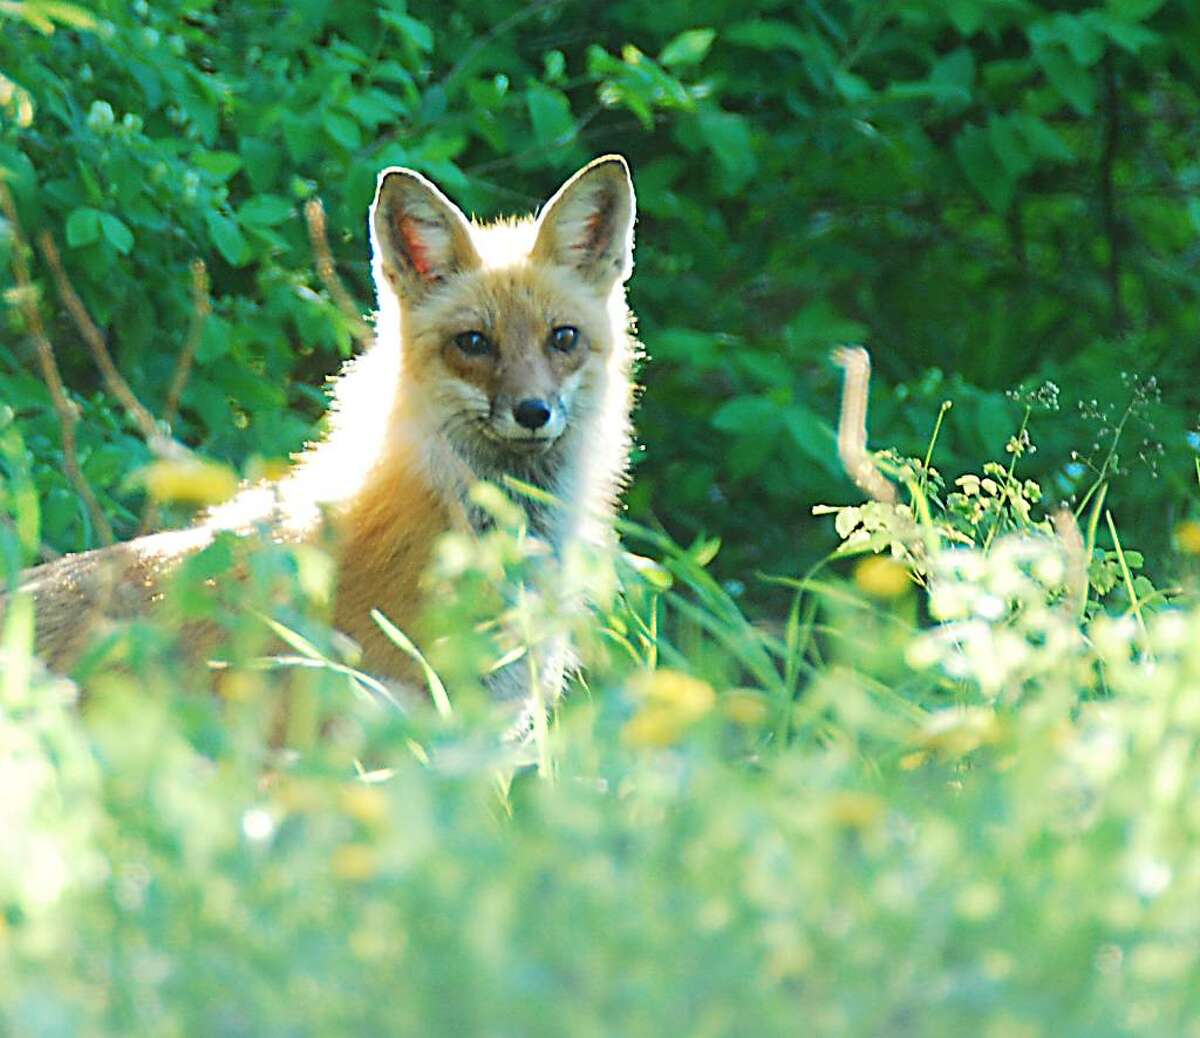 The speculative stare of an adult fox trying to decide if I was a threat, or not. (Bill Danielson)